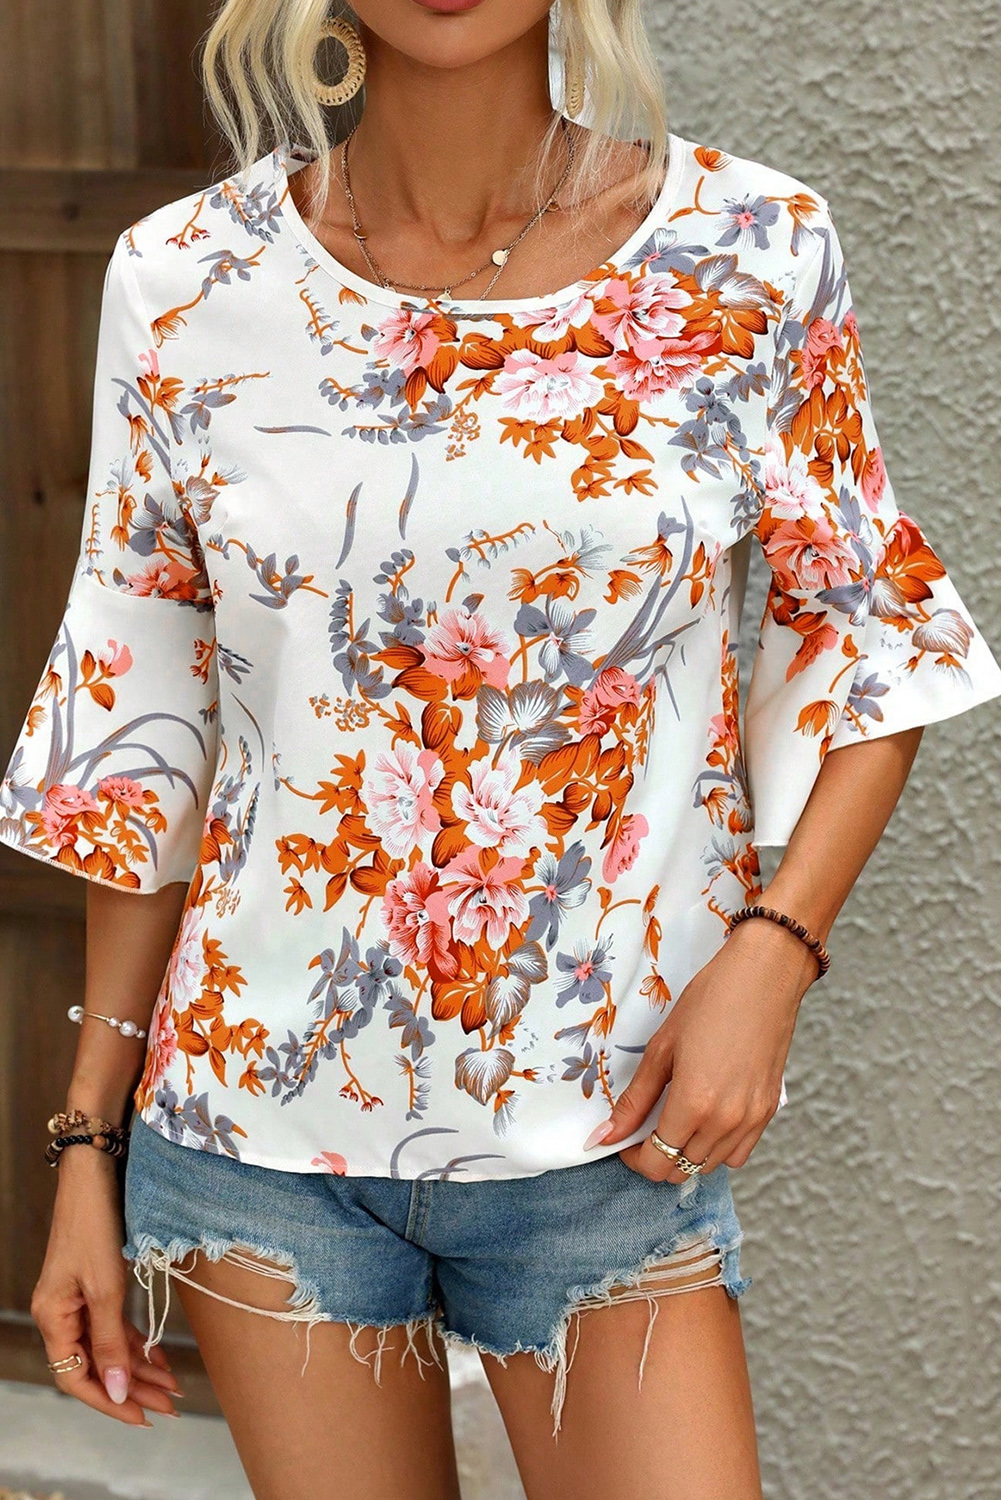 Shewin Wholesale Dropshippers White FLOWER Print Round Neck Half Sleeve Top